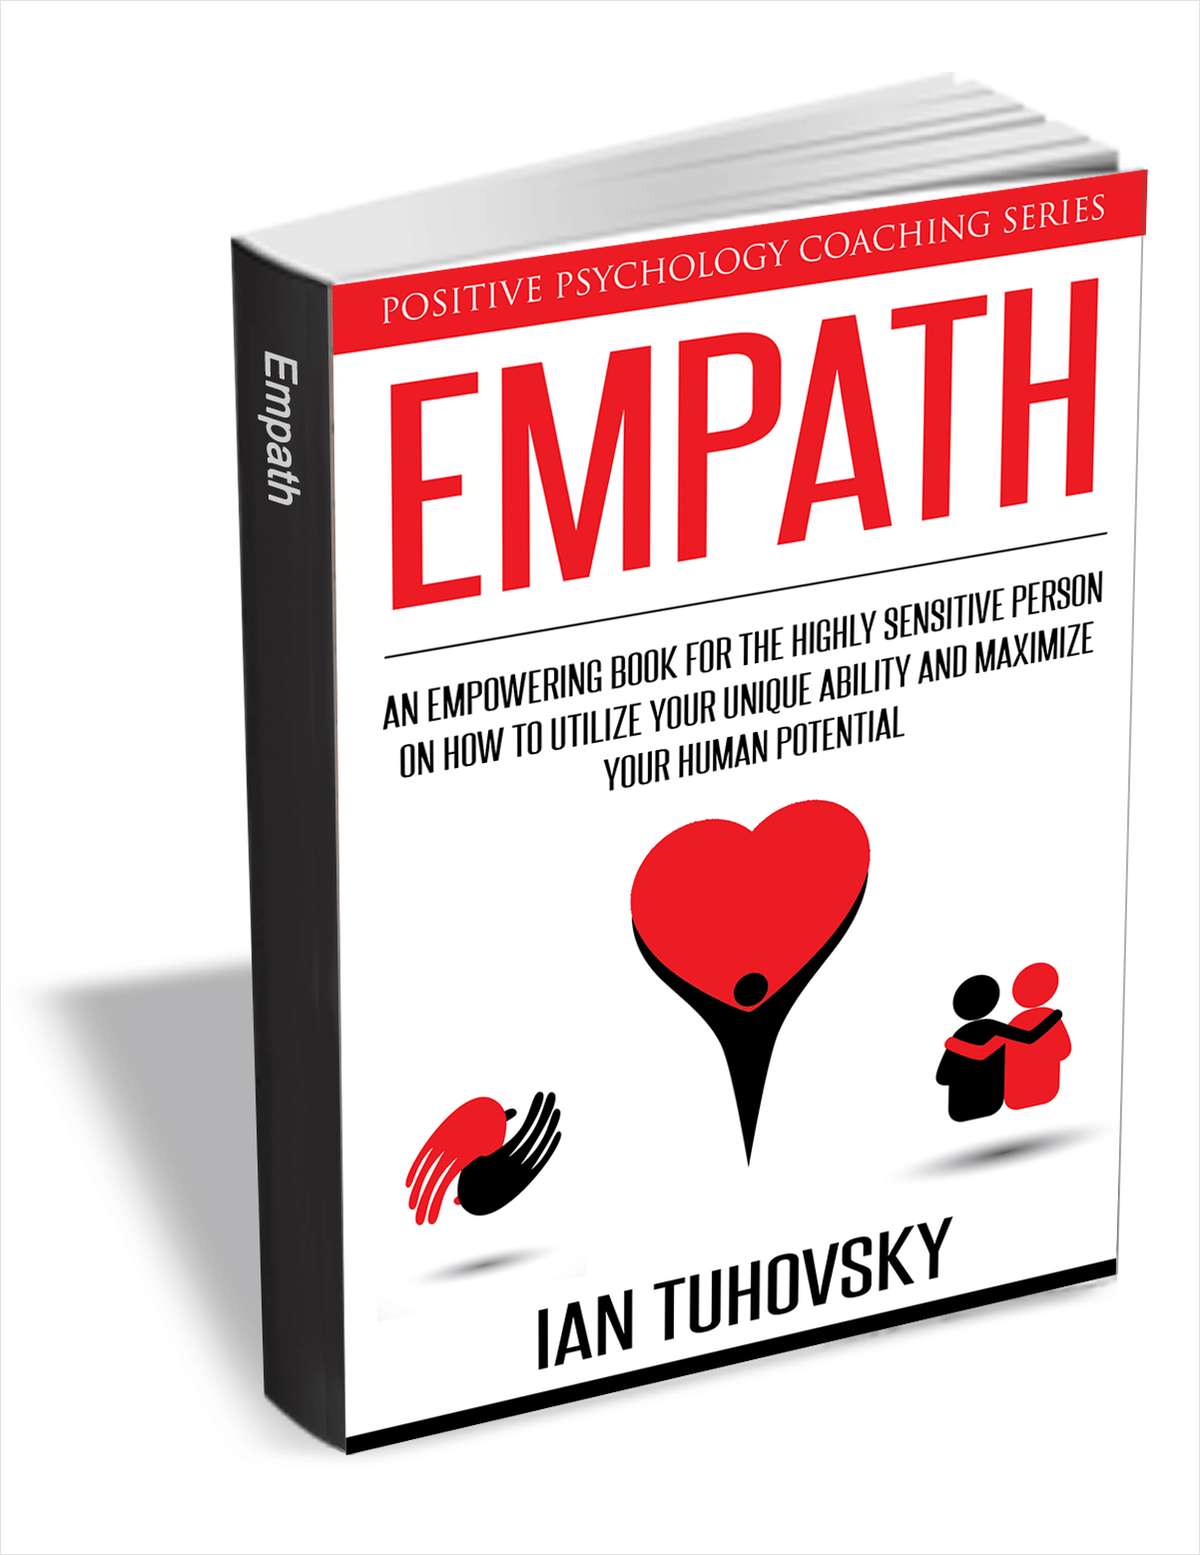 Empath - An Empowering Book for the Highly Sensitive Person on Utilizing Your Unique Ability and Maximizing Your Human Potential